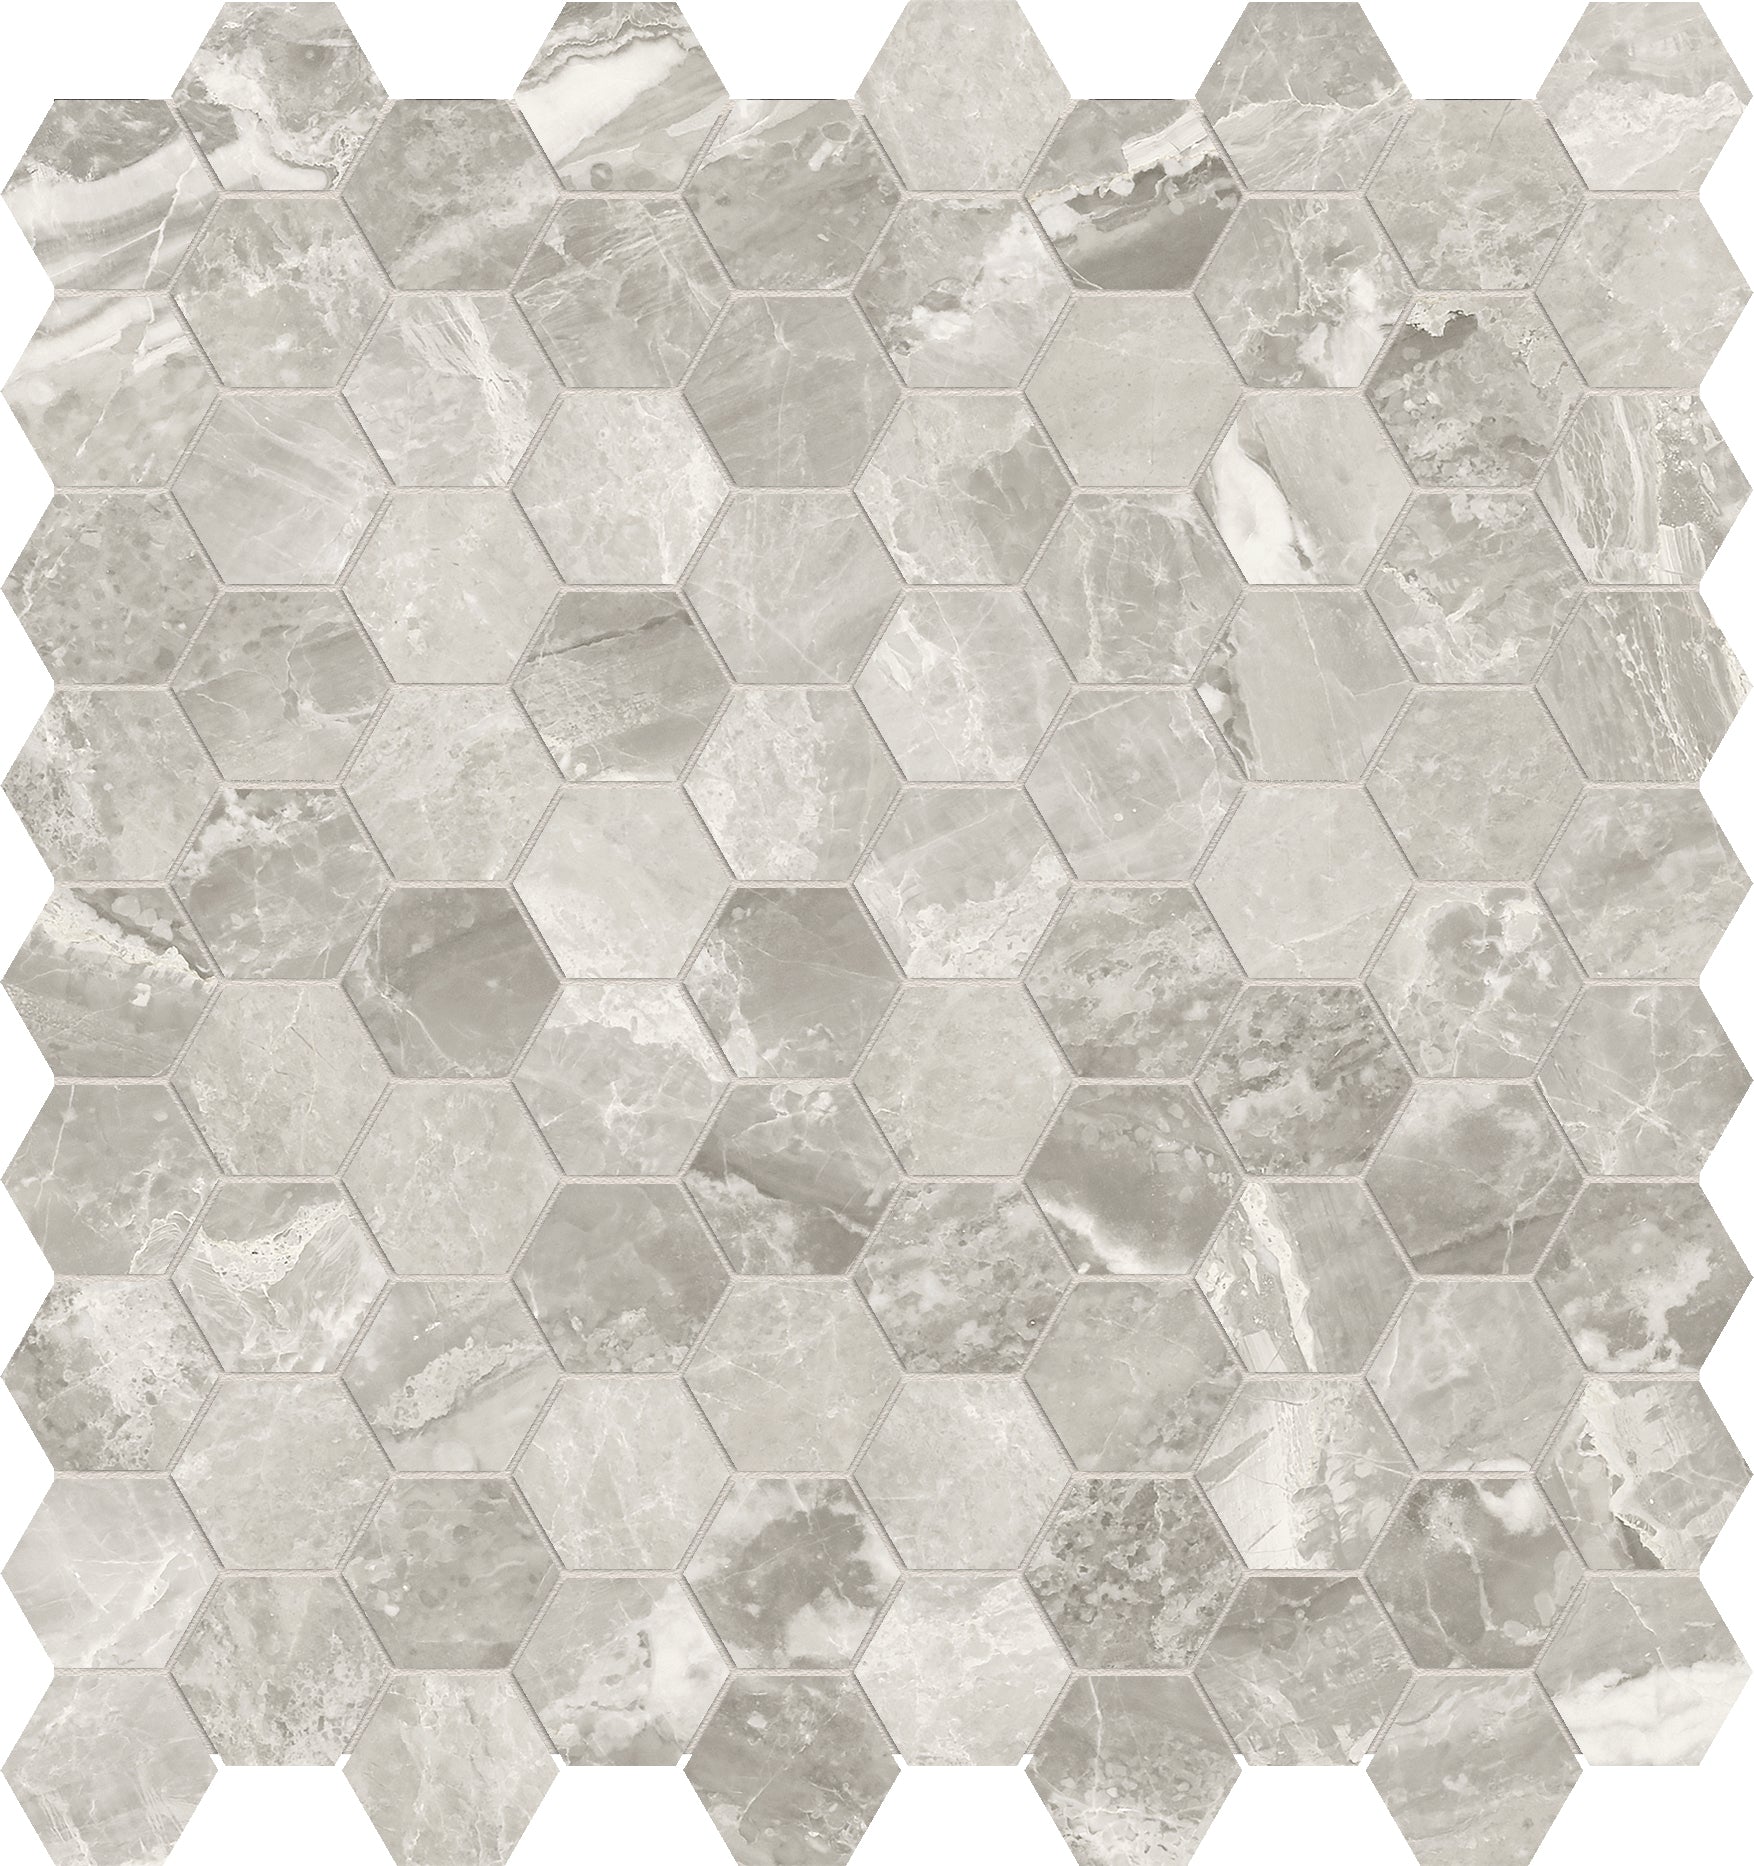 stella argento hexagon 1&25-inch pattern glazed porcelain mosaic from mayfair anatolia collection distributed by surface group international polished finish straight edge edge mesh shape